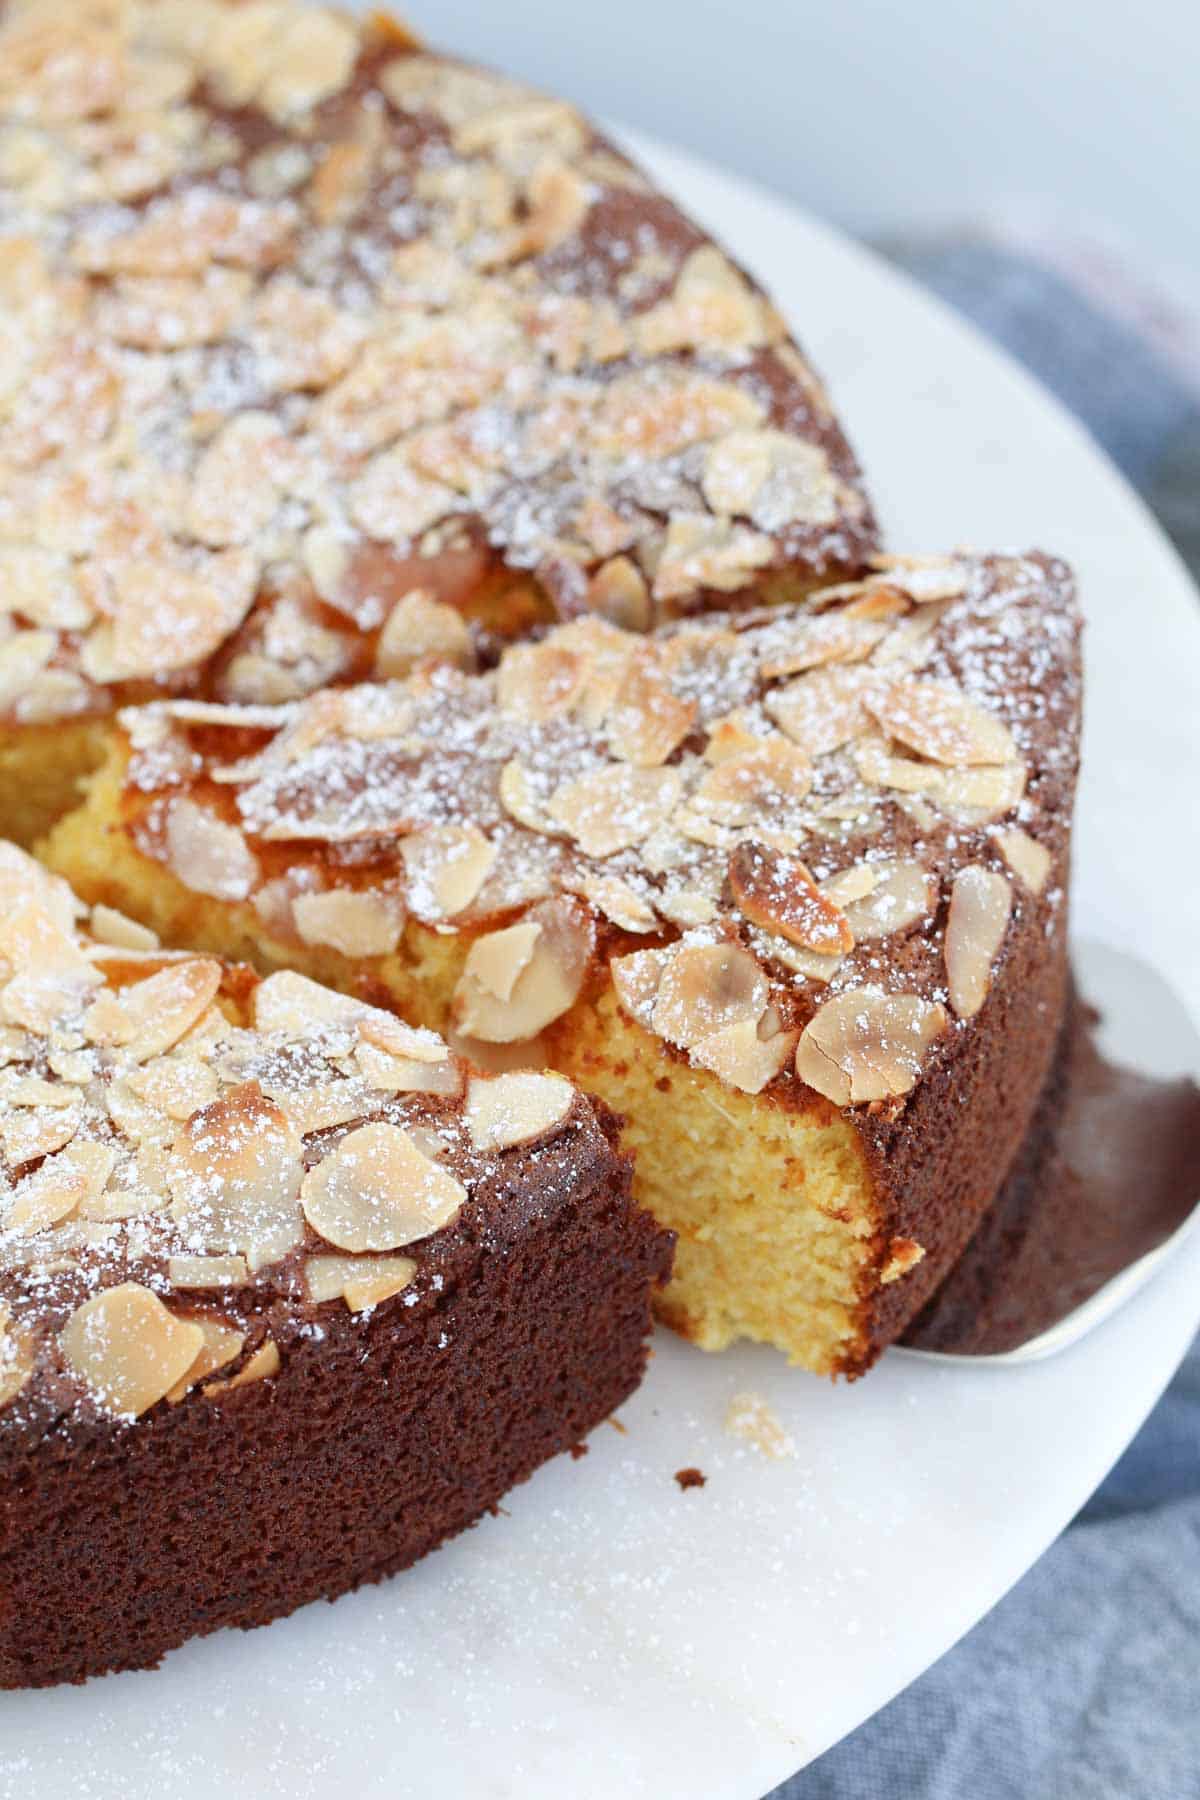 Flaked almonds on top of an orange cake.